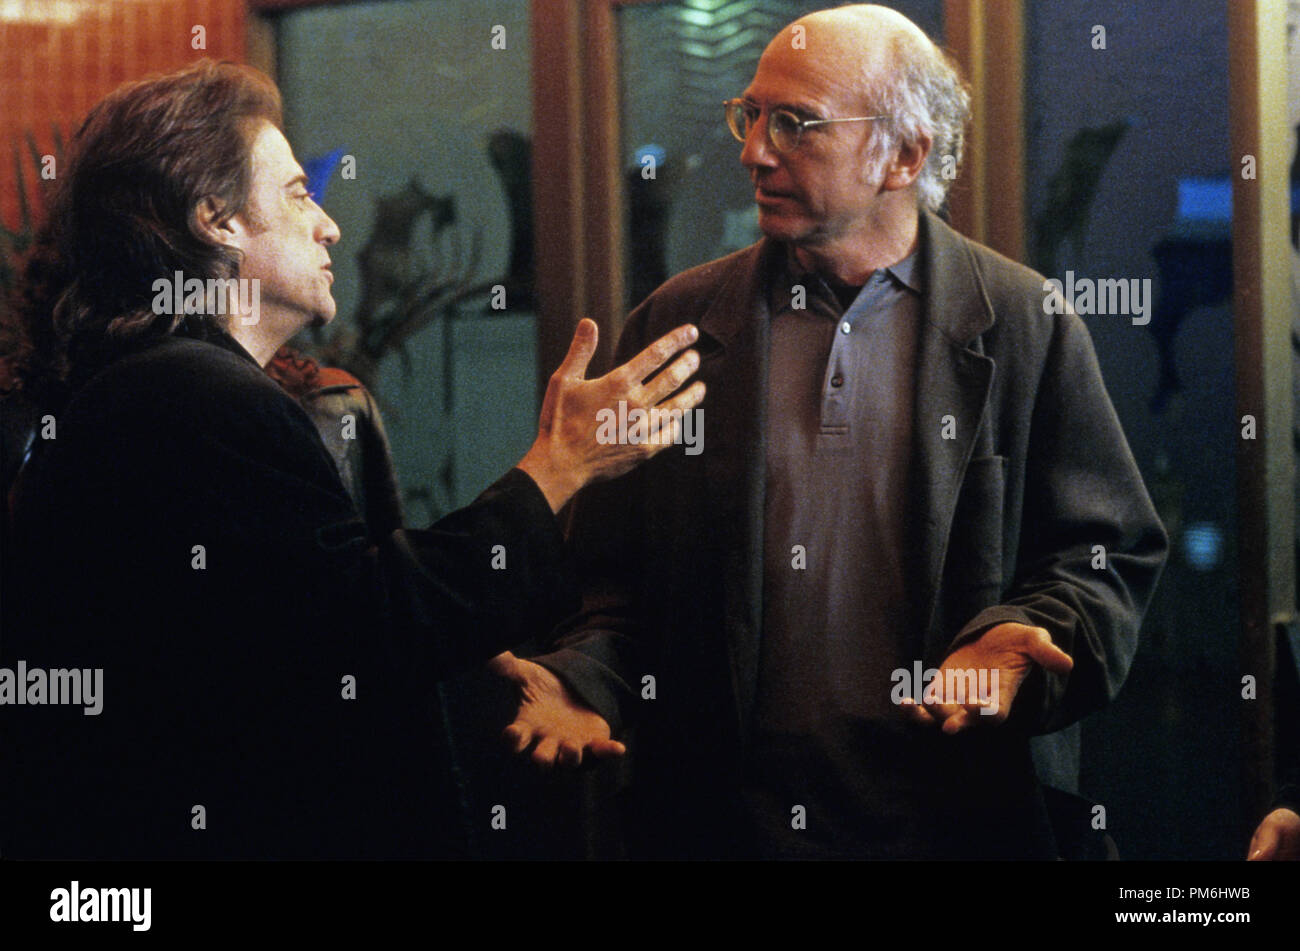 Film Still / Publicity Still from 'Curb Your Enthusiasm' Richard Lewis, Larry David 2001 Photo credit: Larry Watson  File Reference # 30777021THA  For Editorial Use Only -  All Rights Reserved Stock Photo